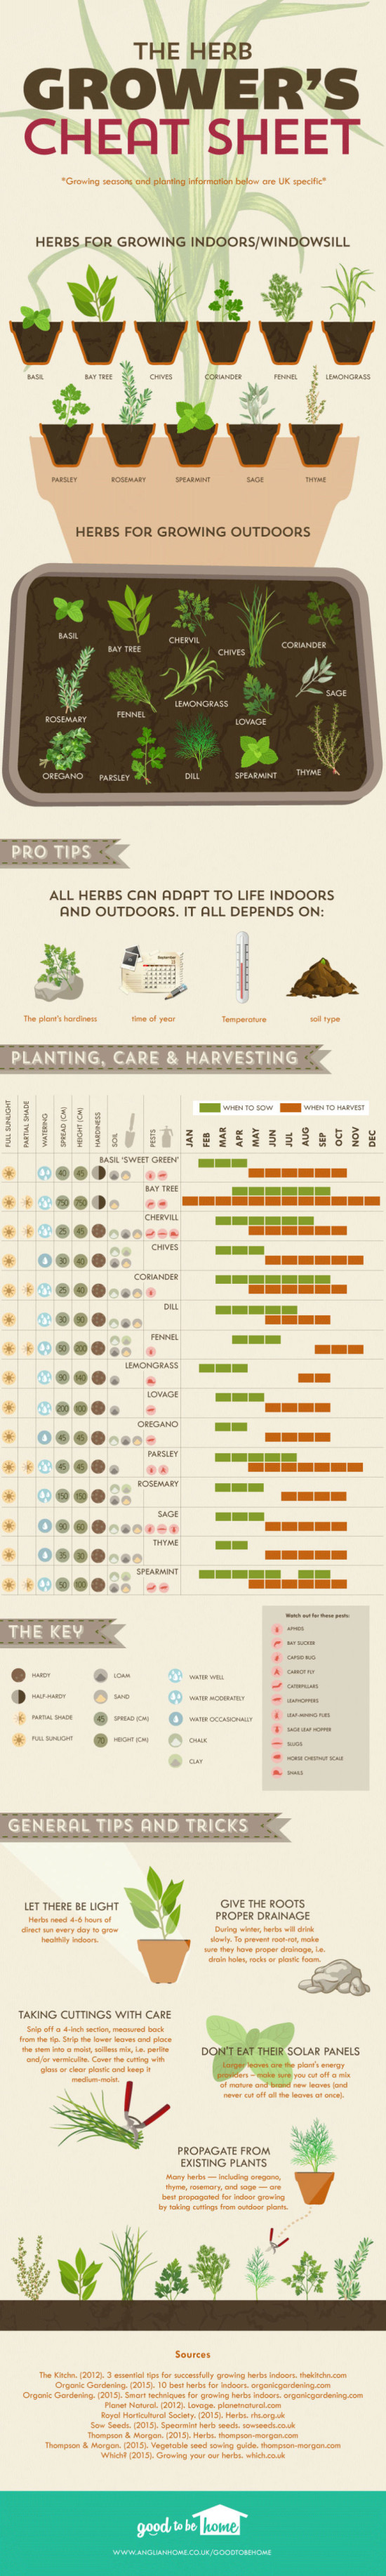 the-herb-growers-cheat-sheet-infographic